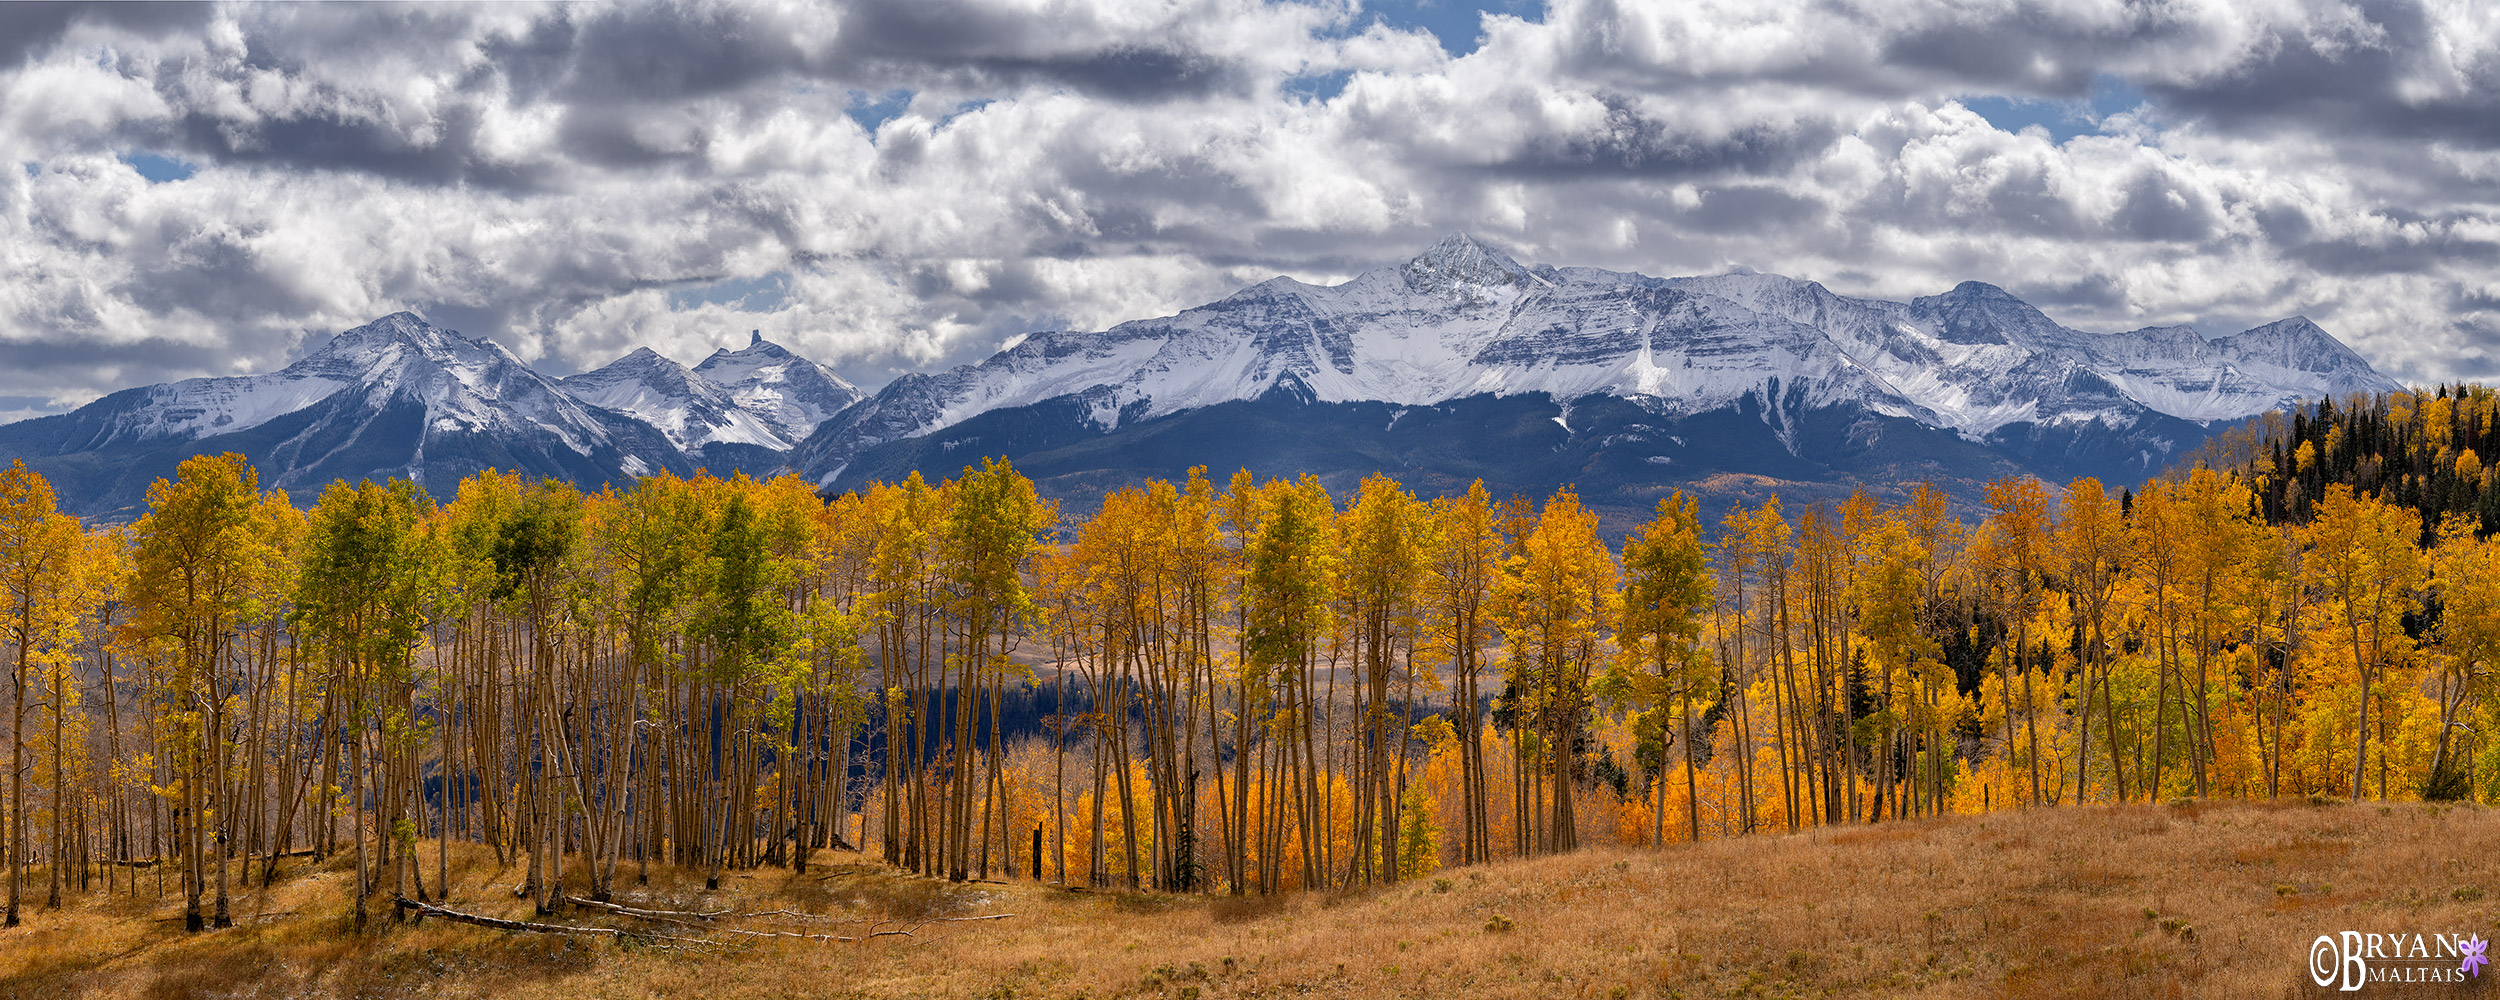 san miguel mountains panorama print fall colors telluride